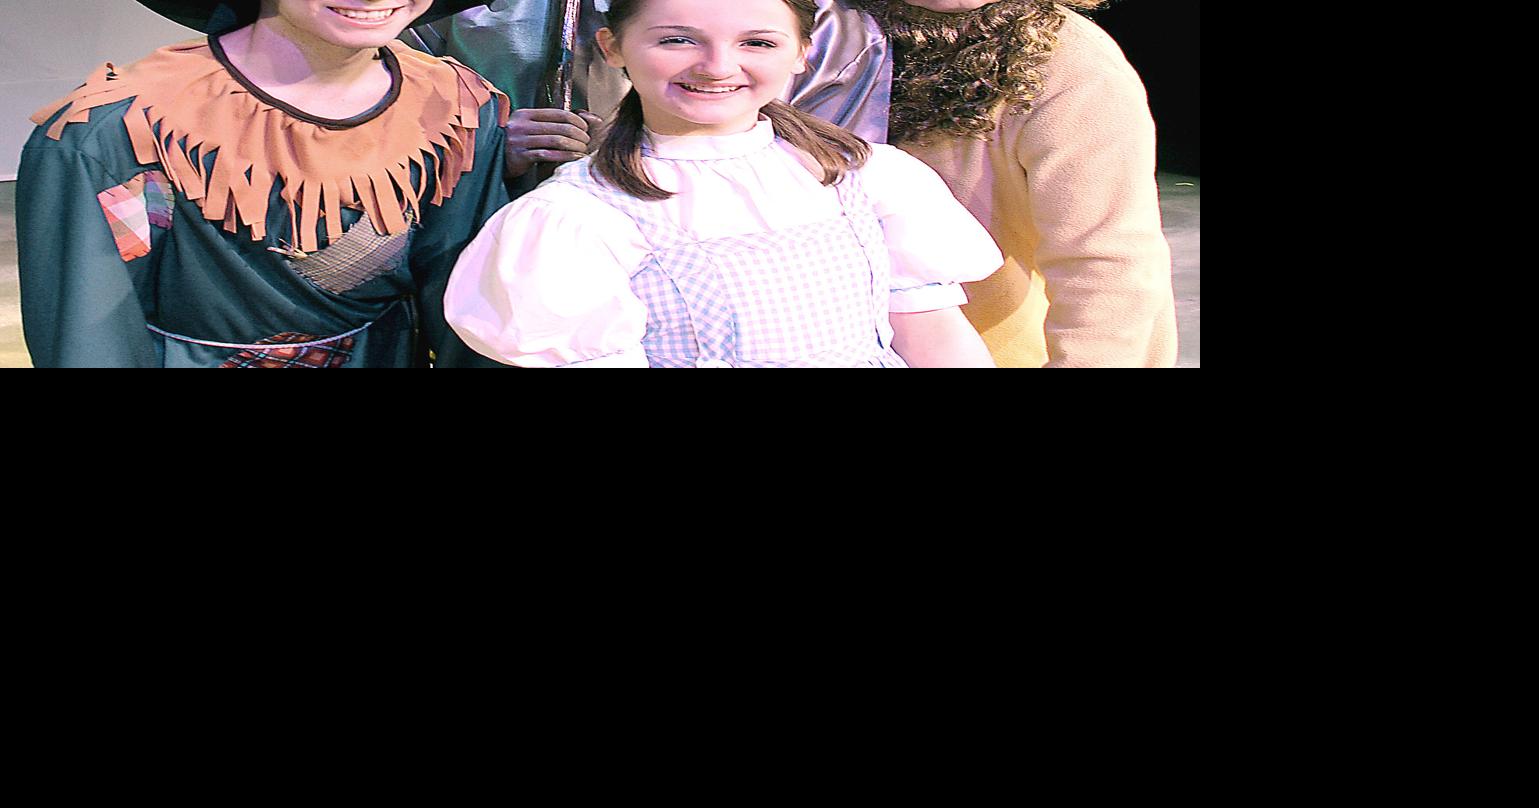 The Wizard of Oz - Mayo Performing Arts Center